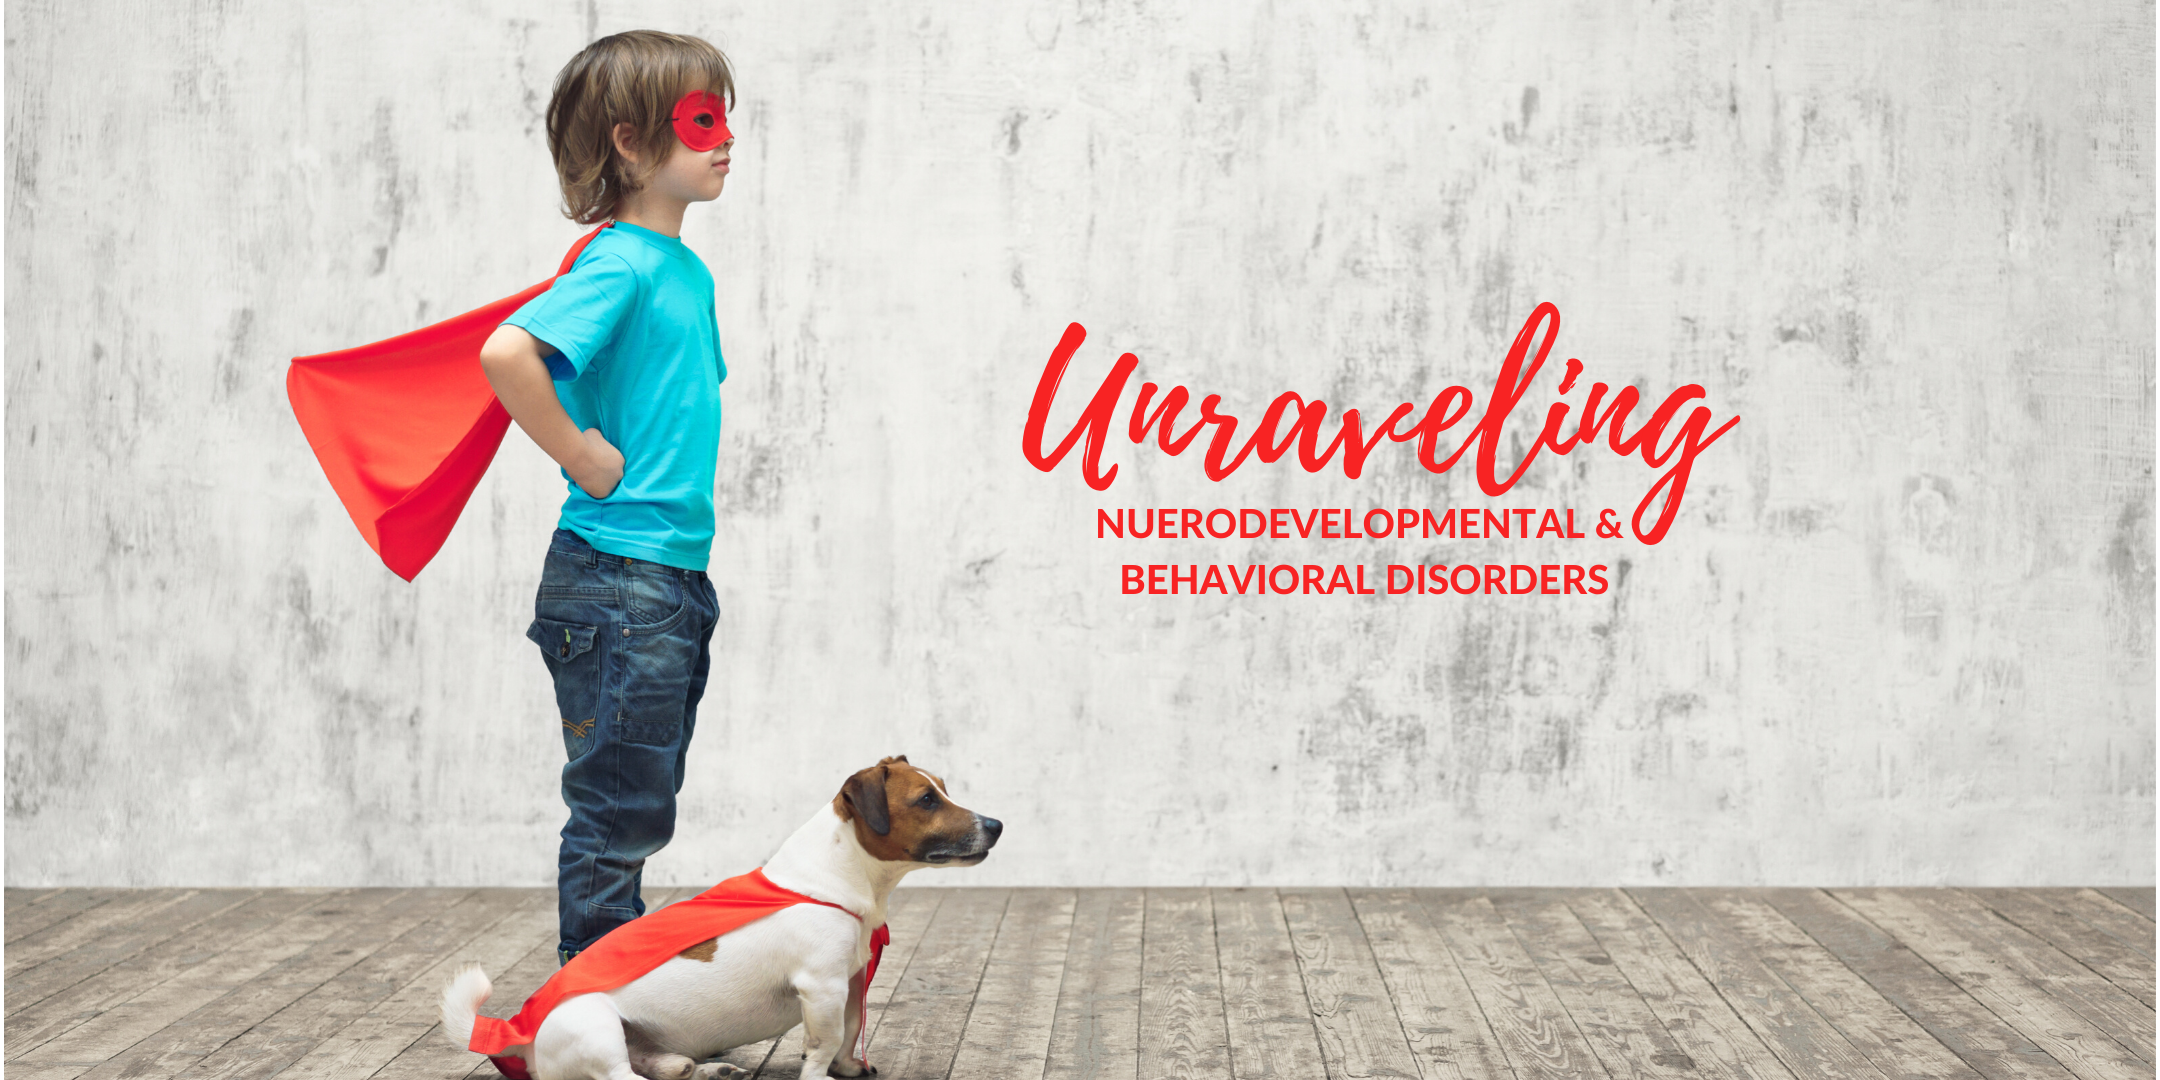 Unraveling Neurodevelopmental and Behavioral Disorders - ADHD, Autism, etc.